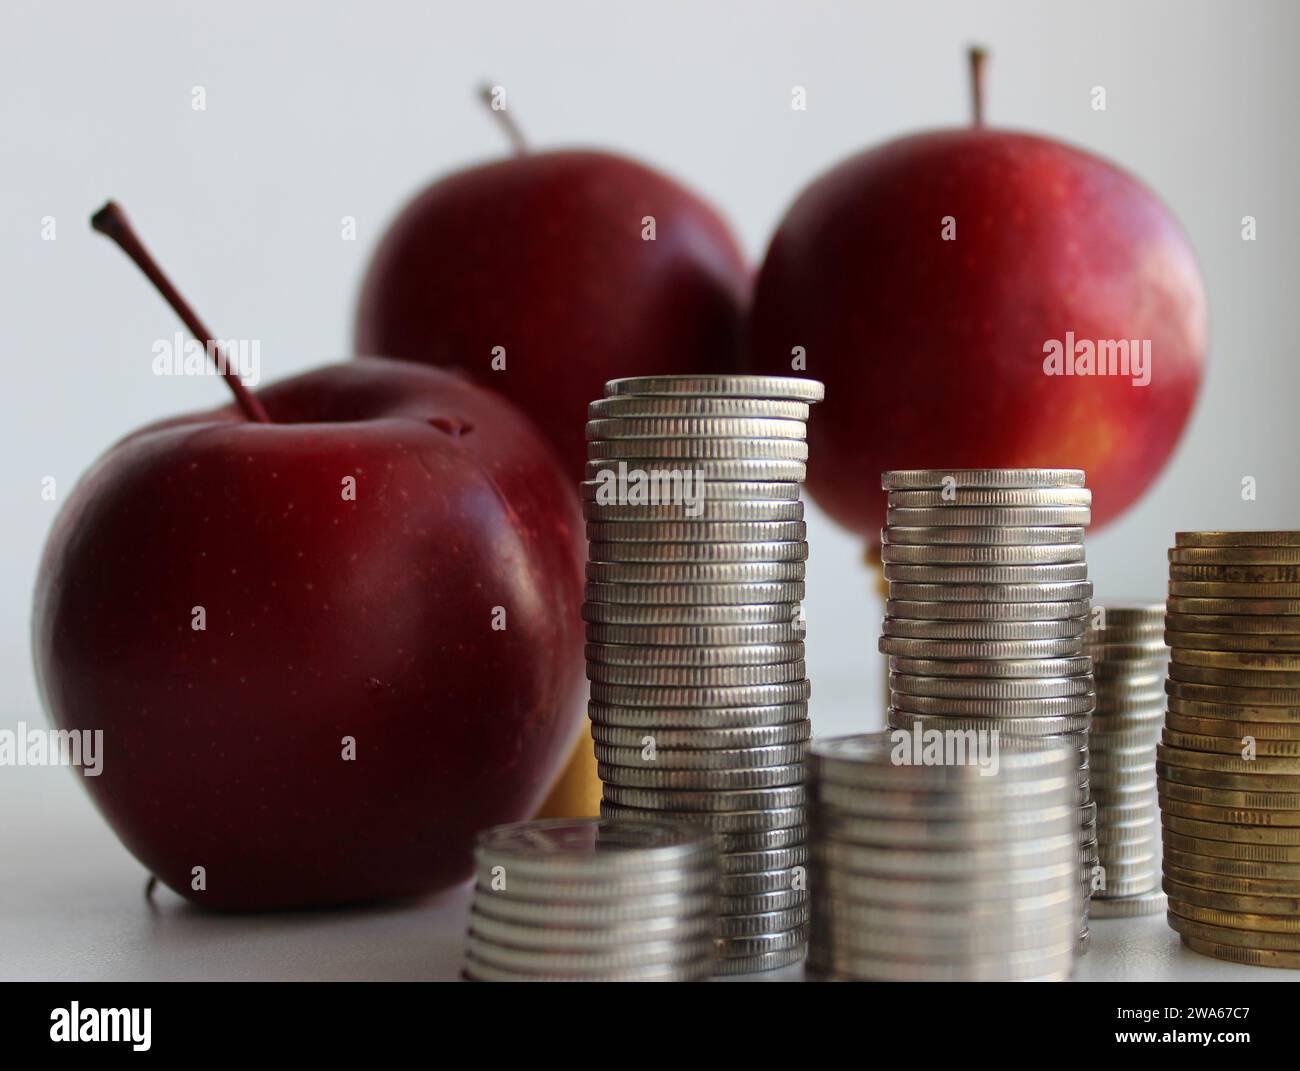 Blurred red apples behind the piles of coins isolated on white. Concept photo for illustration of increasing fruits price Stock Photo